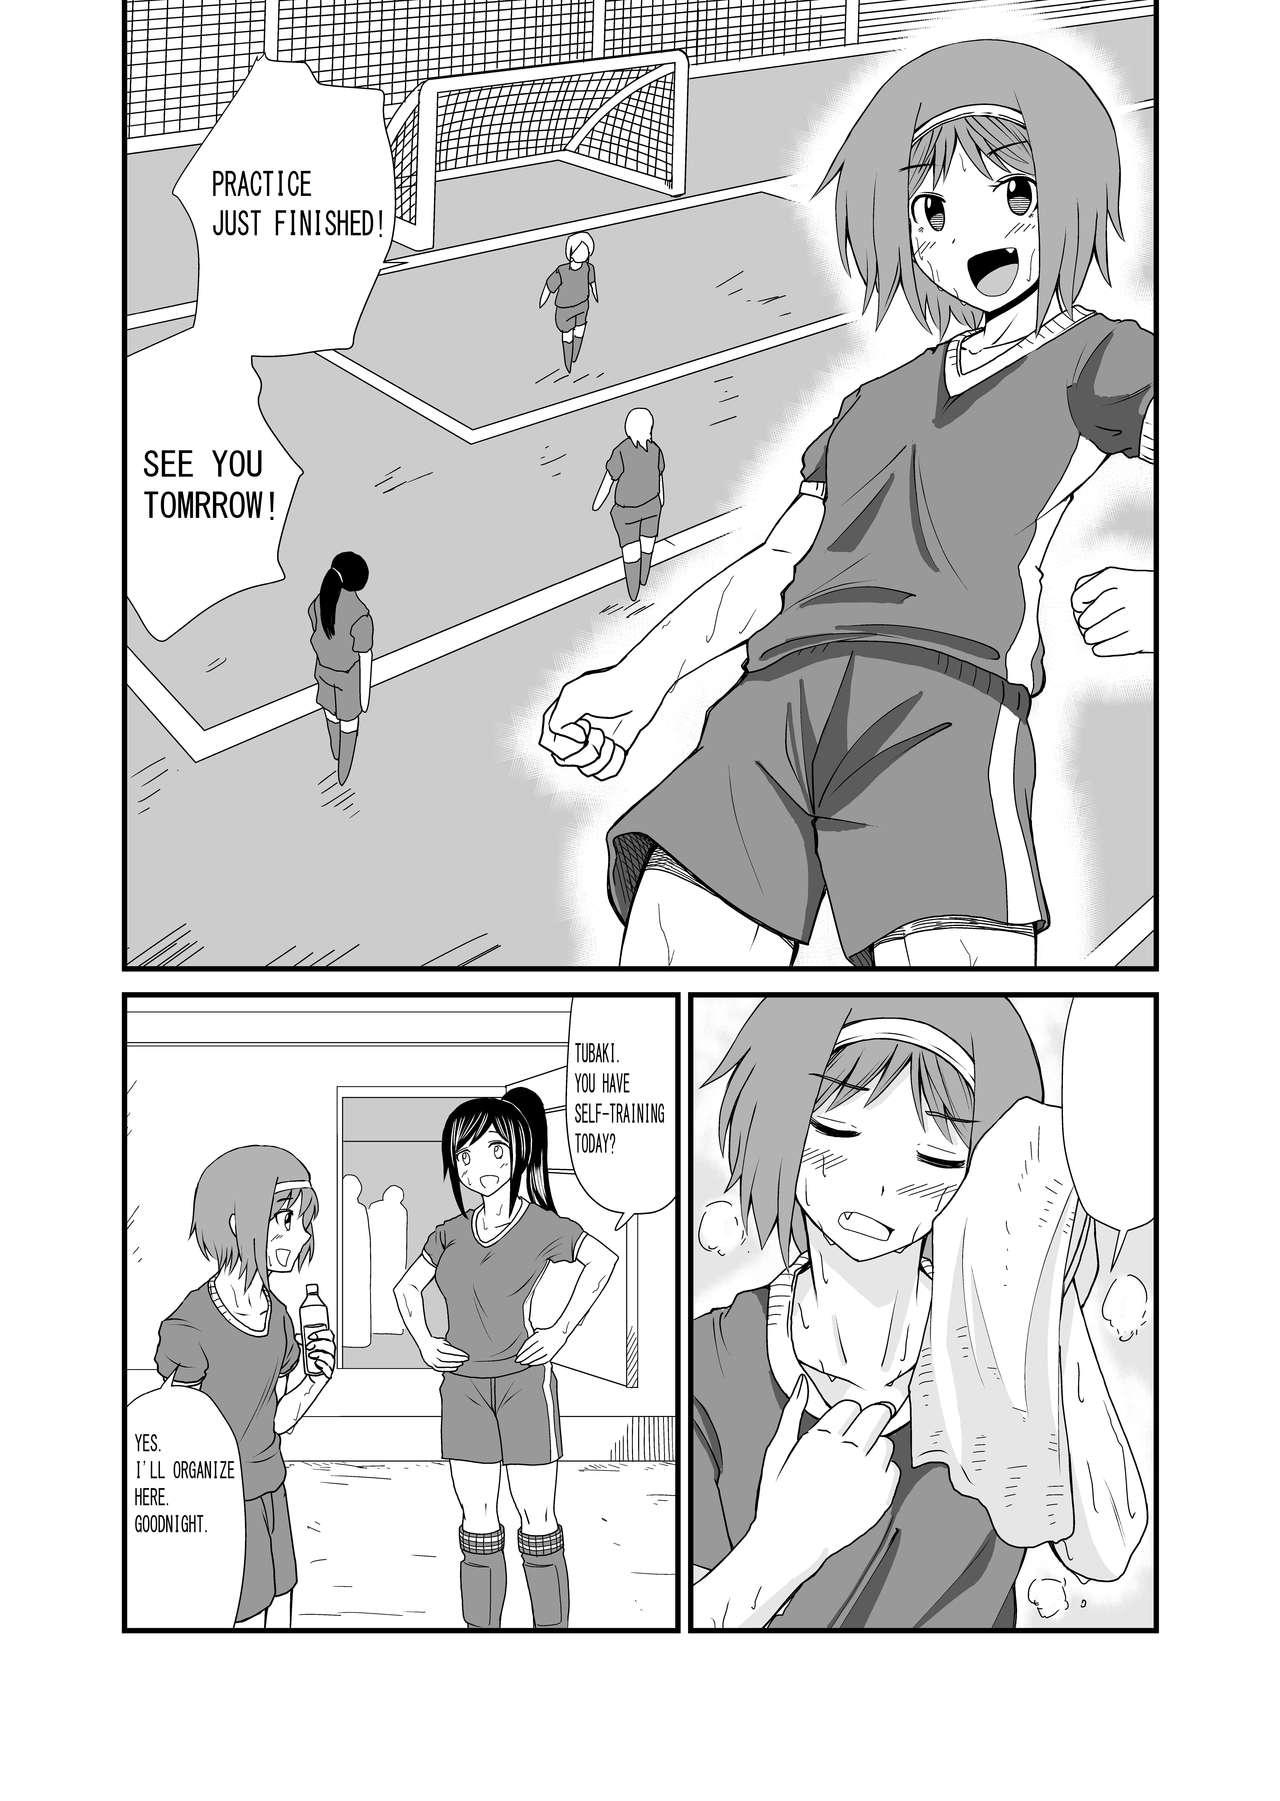 Top Stepping and Crushing English - Original Affair - Page 5